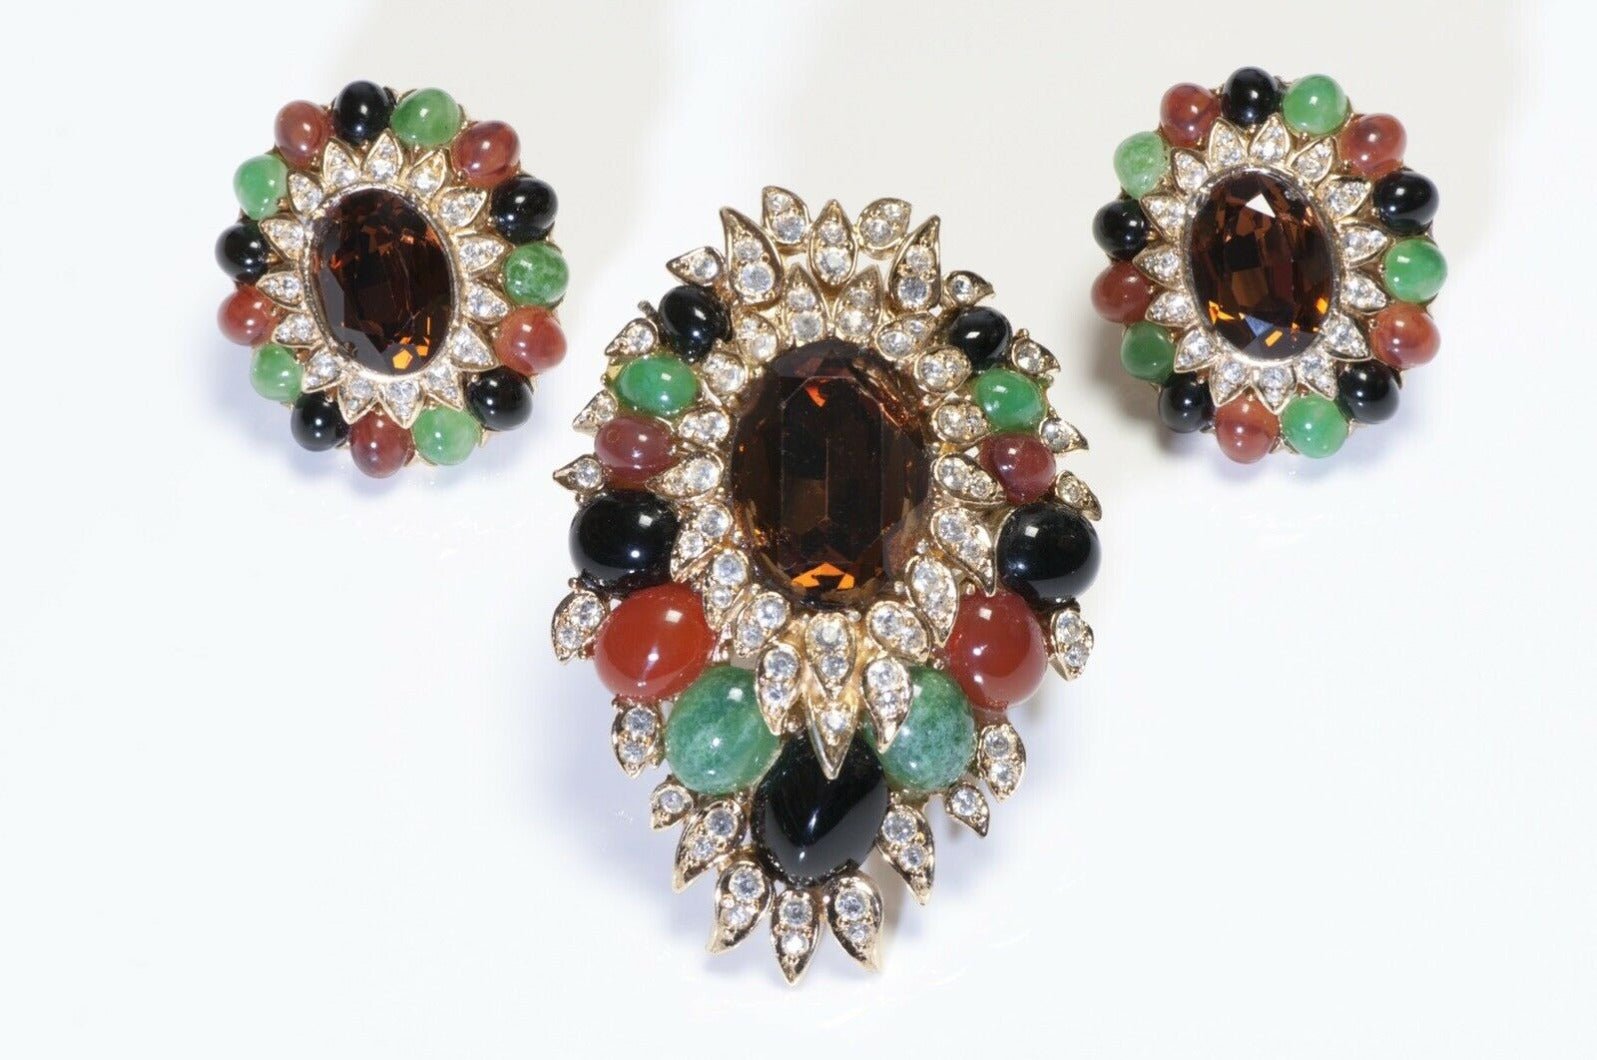 CINER Crystal Cabochon Glass Mughal Style Brooch Earrings Set